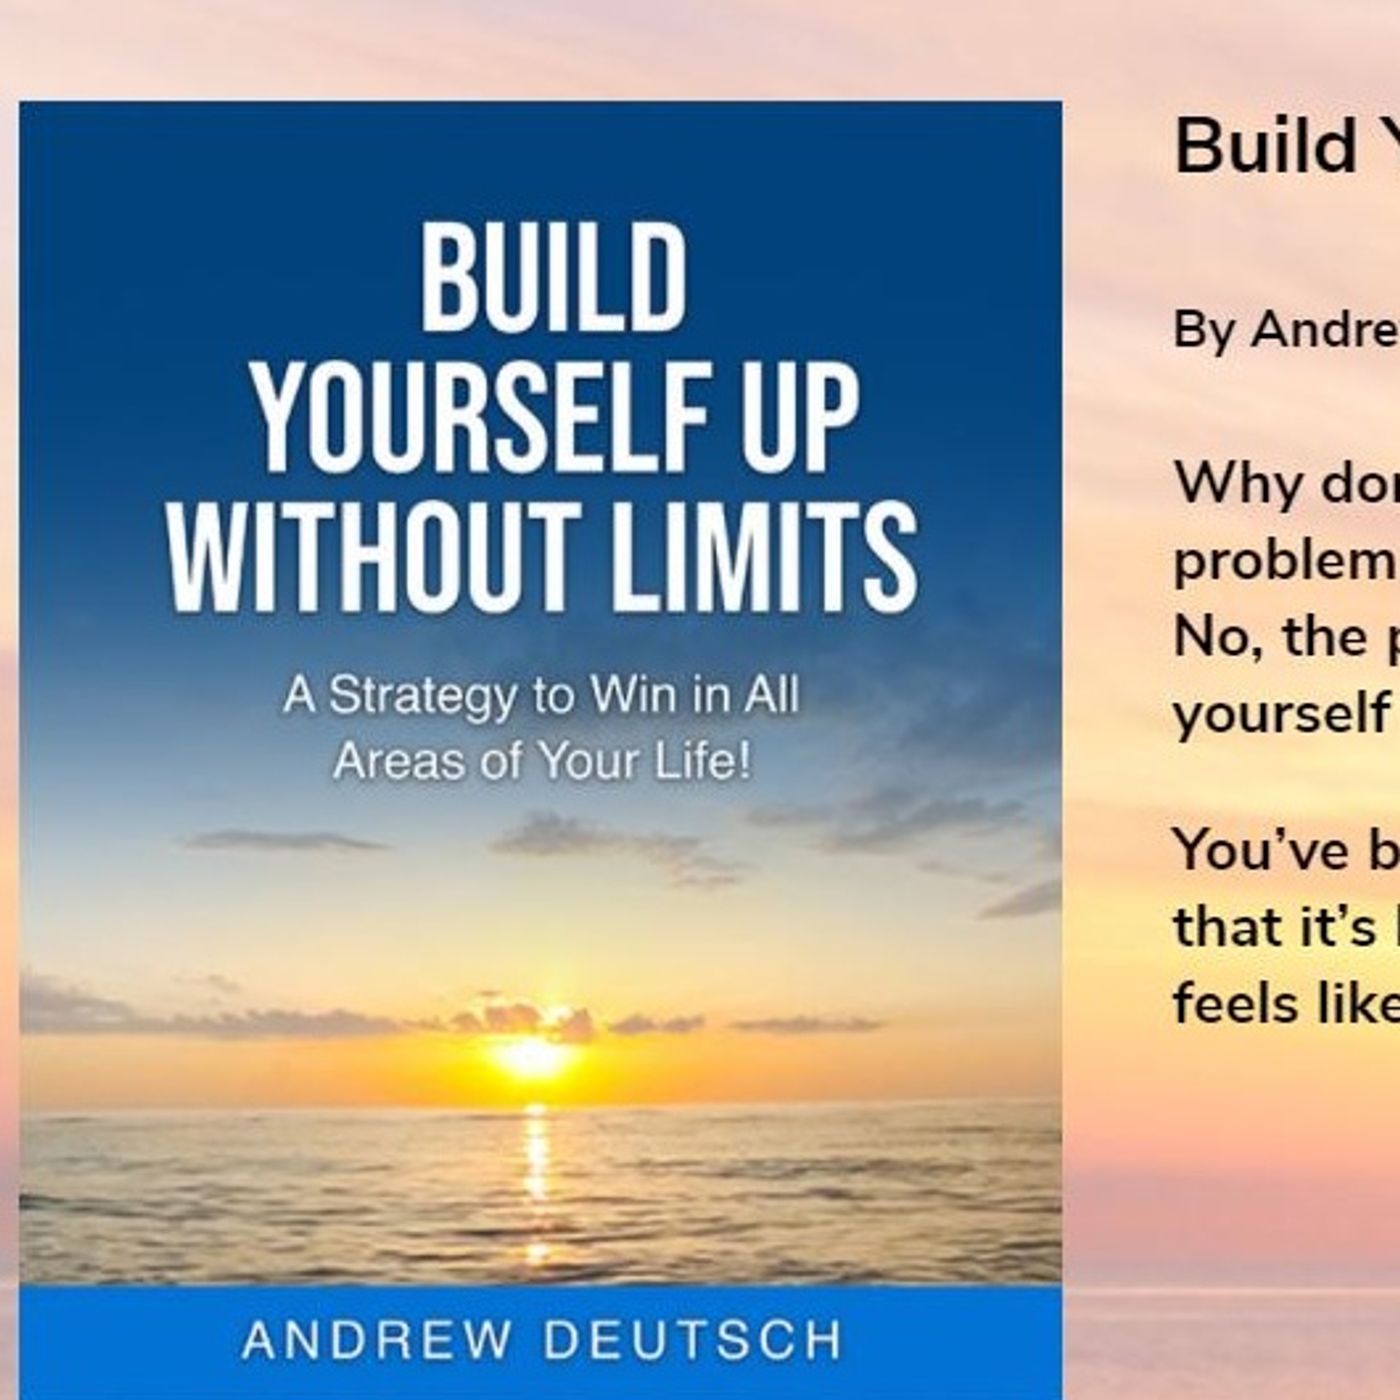 Build Yourself Up Without Limits To Win